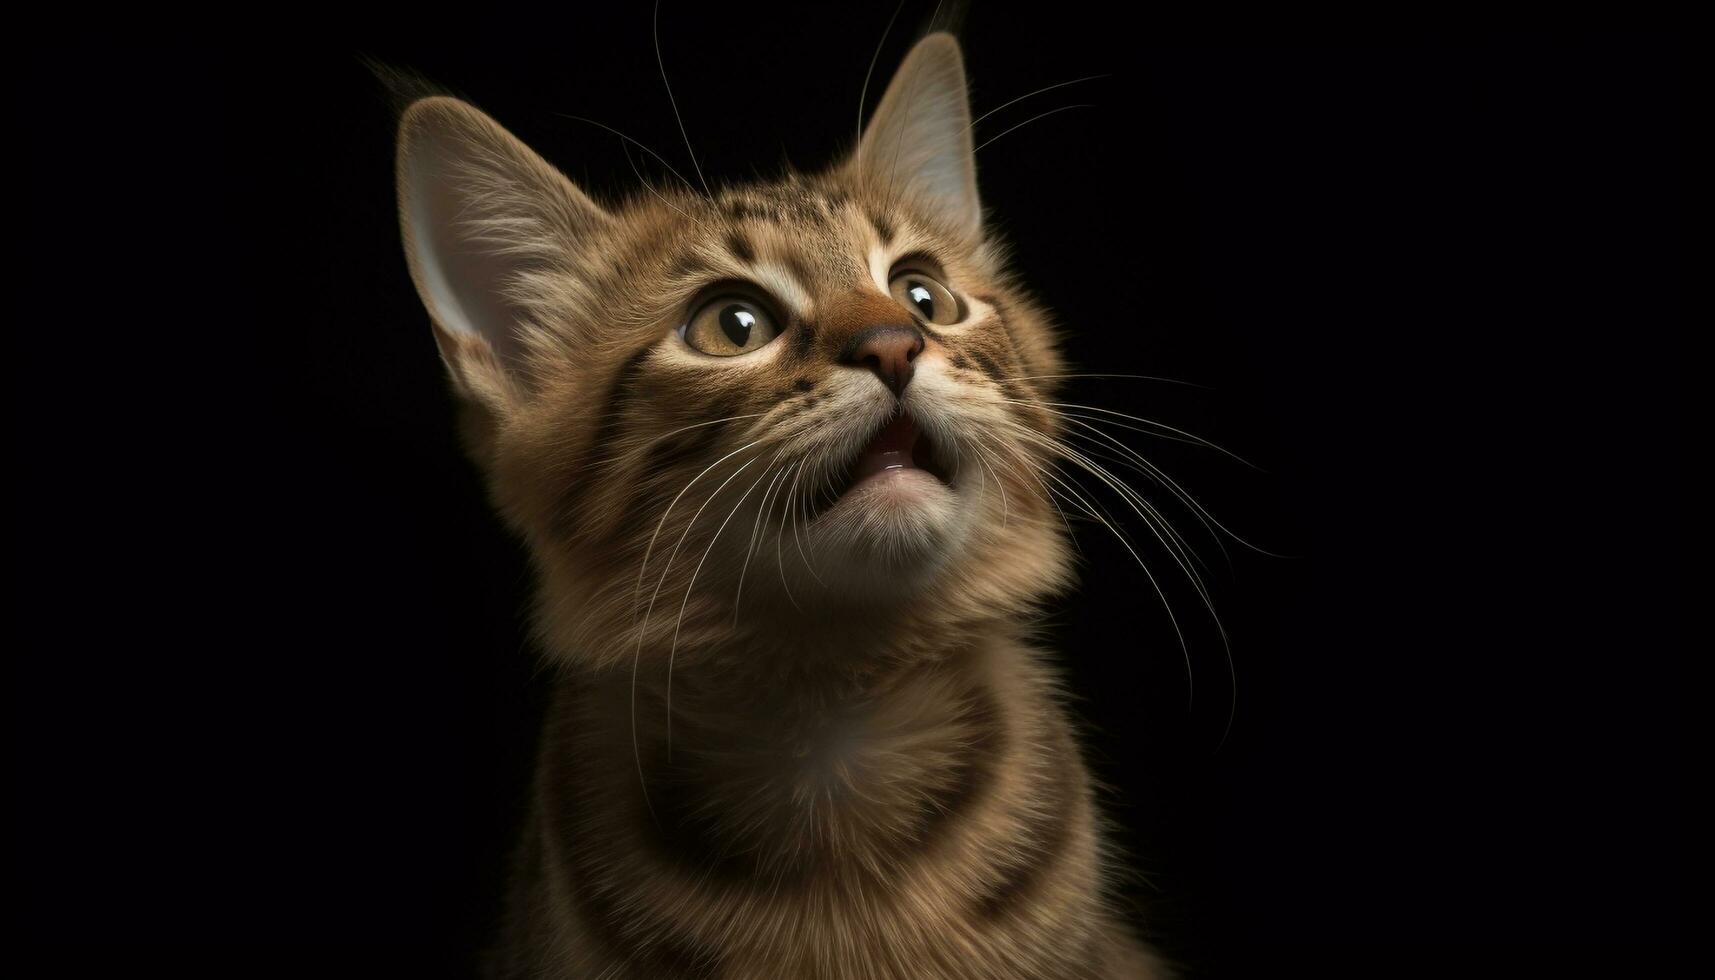 Cute kitten with striped fur, staring at camera, black background generated by AI photo